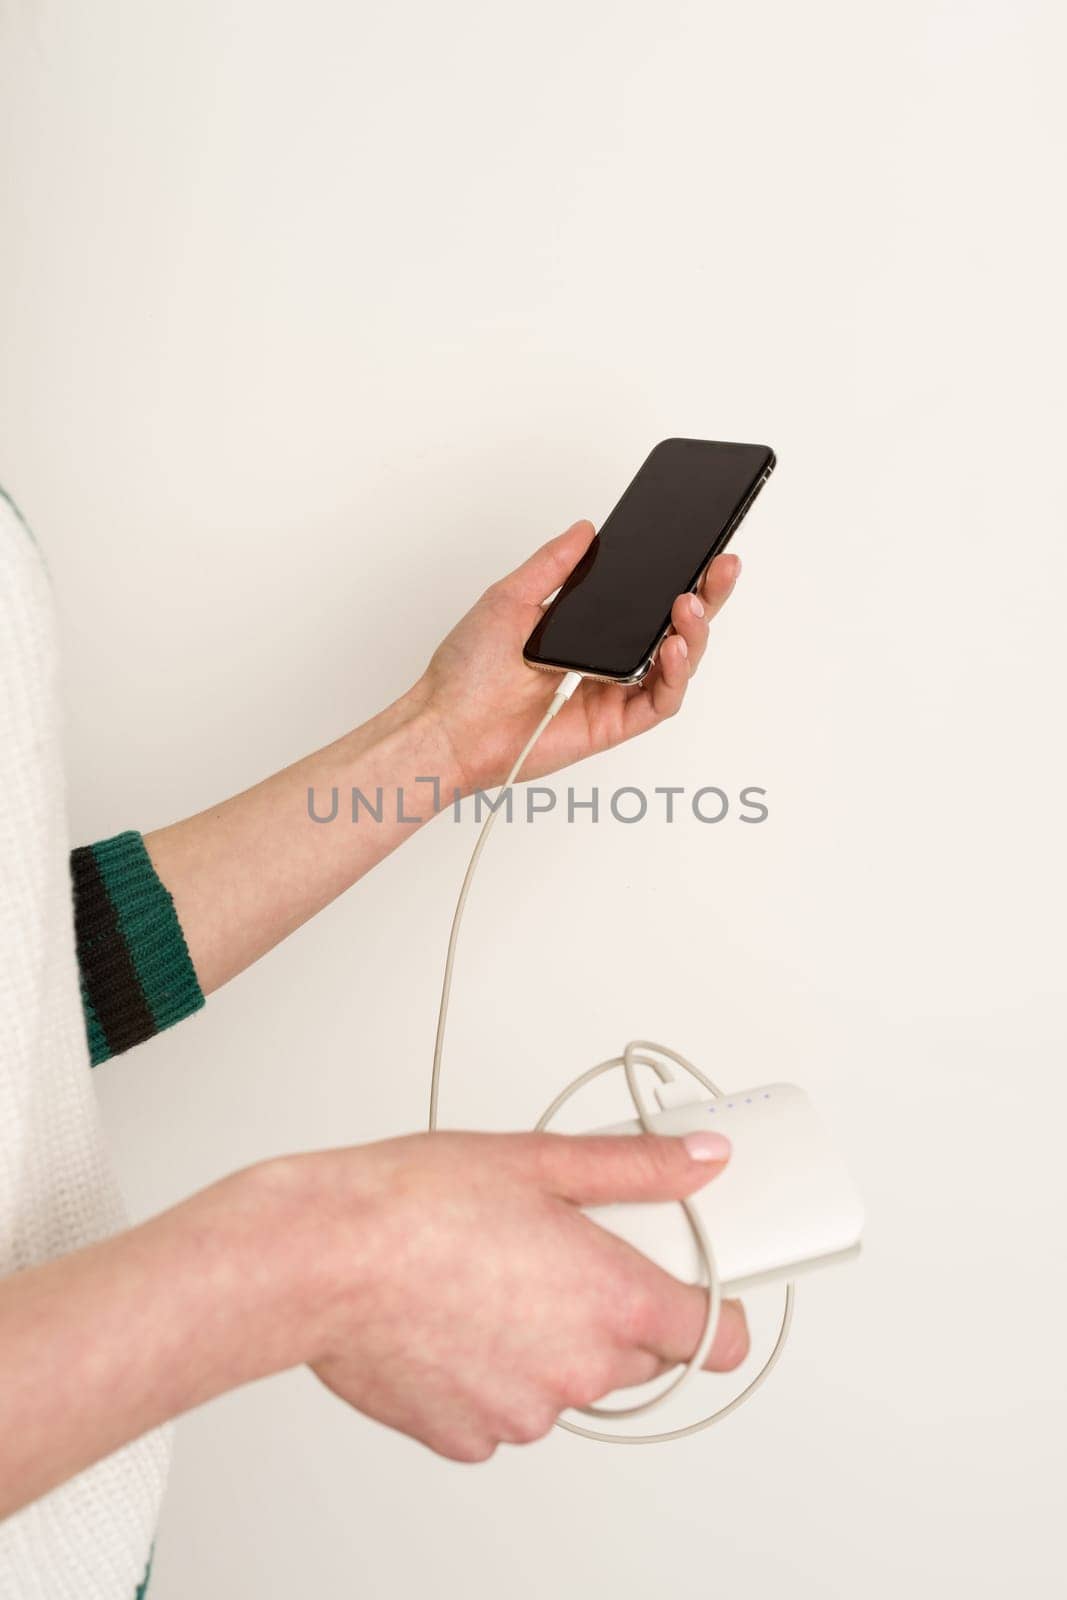 emale hands holding and using smartphone while charging power bank - image